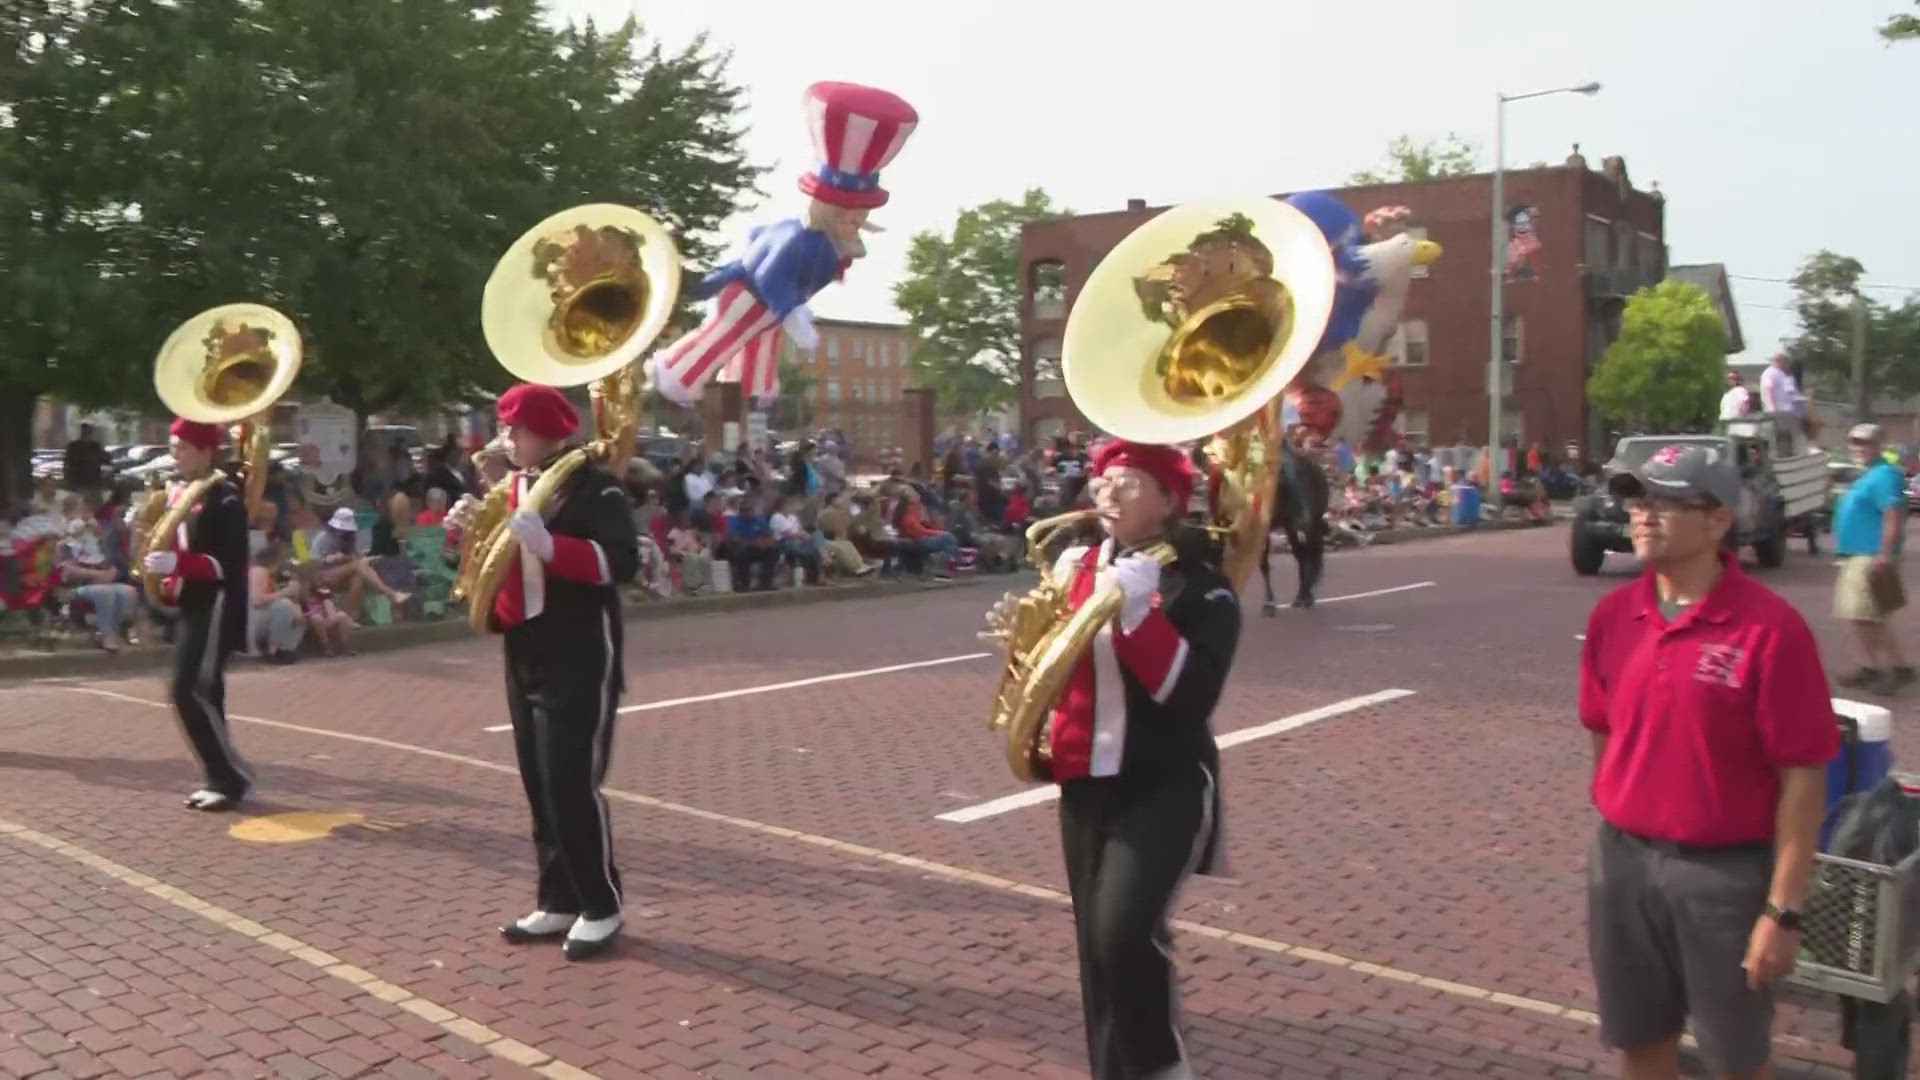 The annual Canton Repository Grand Parade took place on Saturday ahead of the Pro Football Hall of Fame Enshrinement